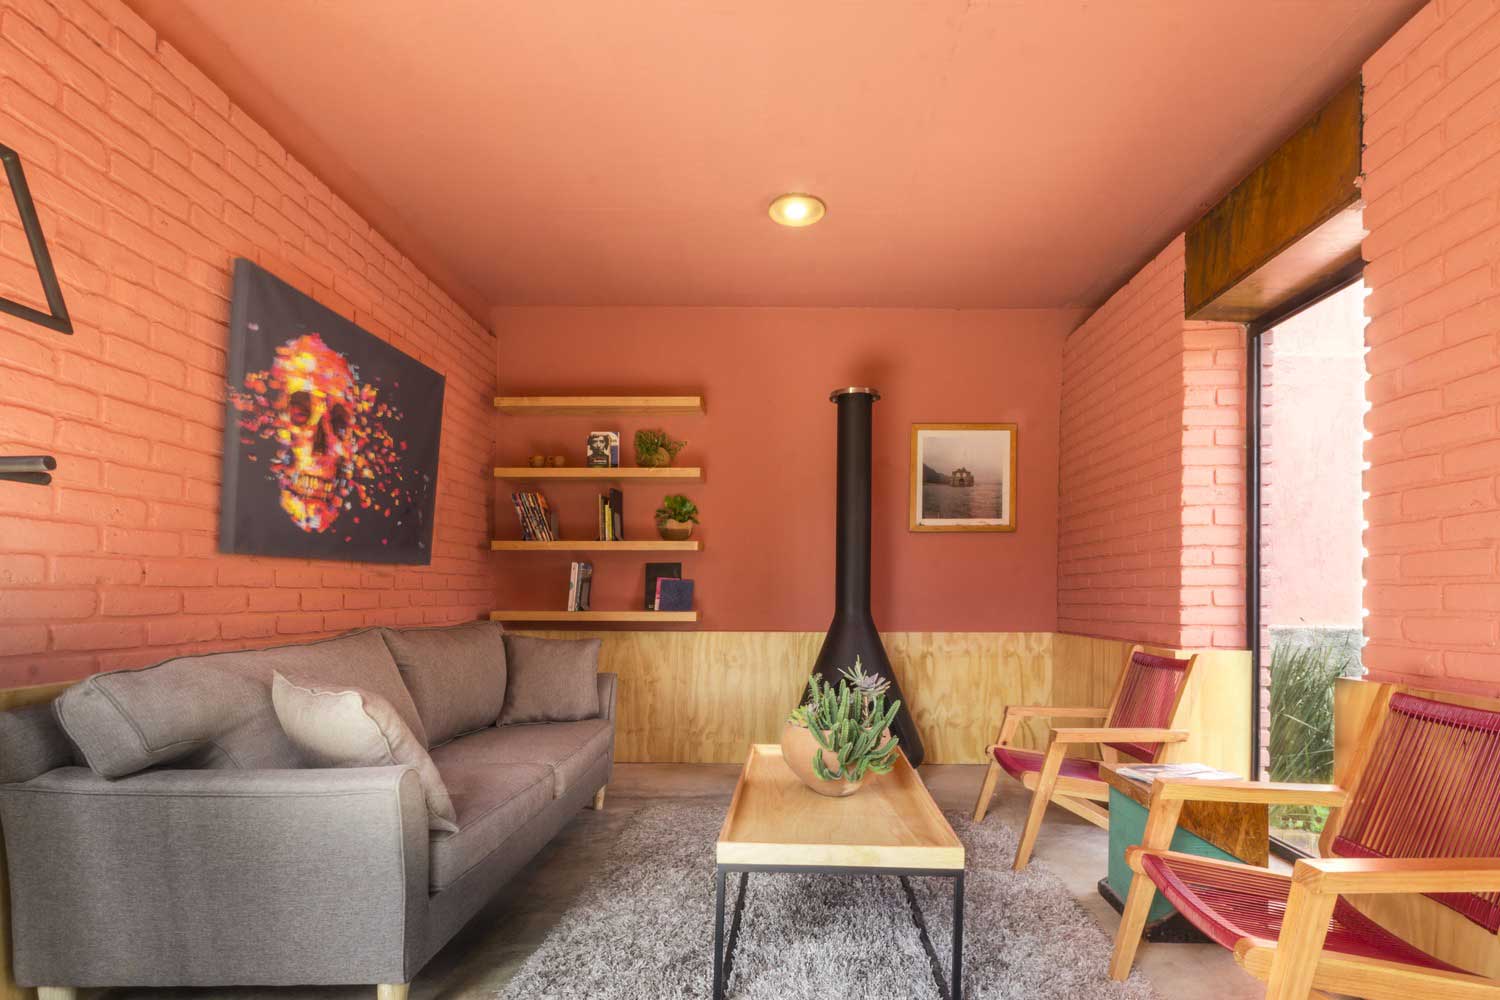 living room of a two-storey red brick house